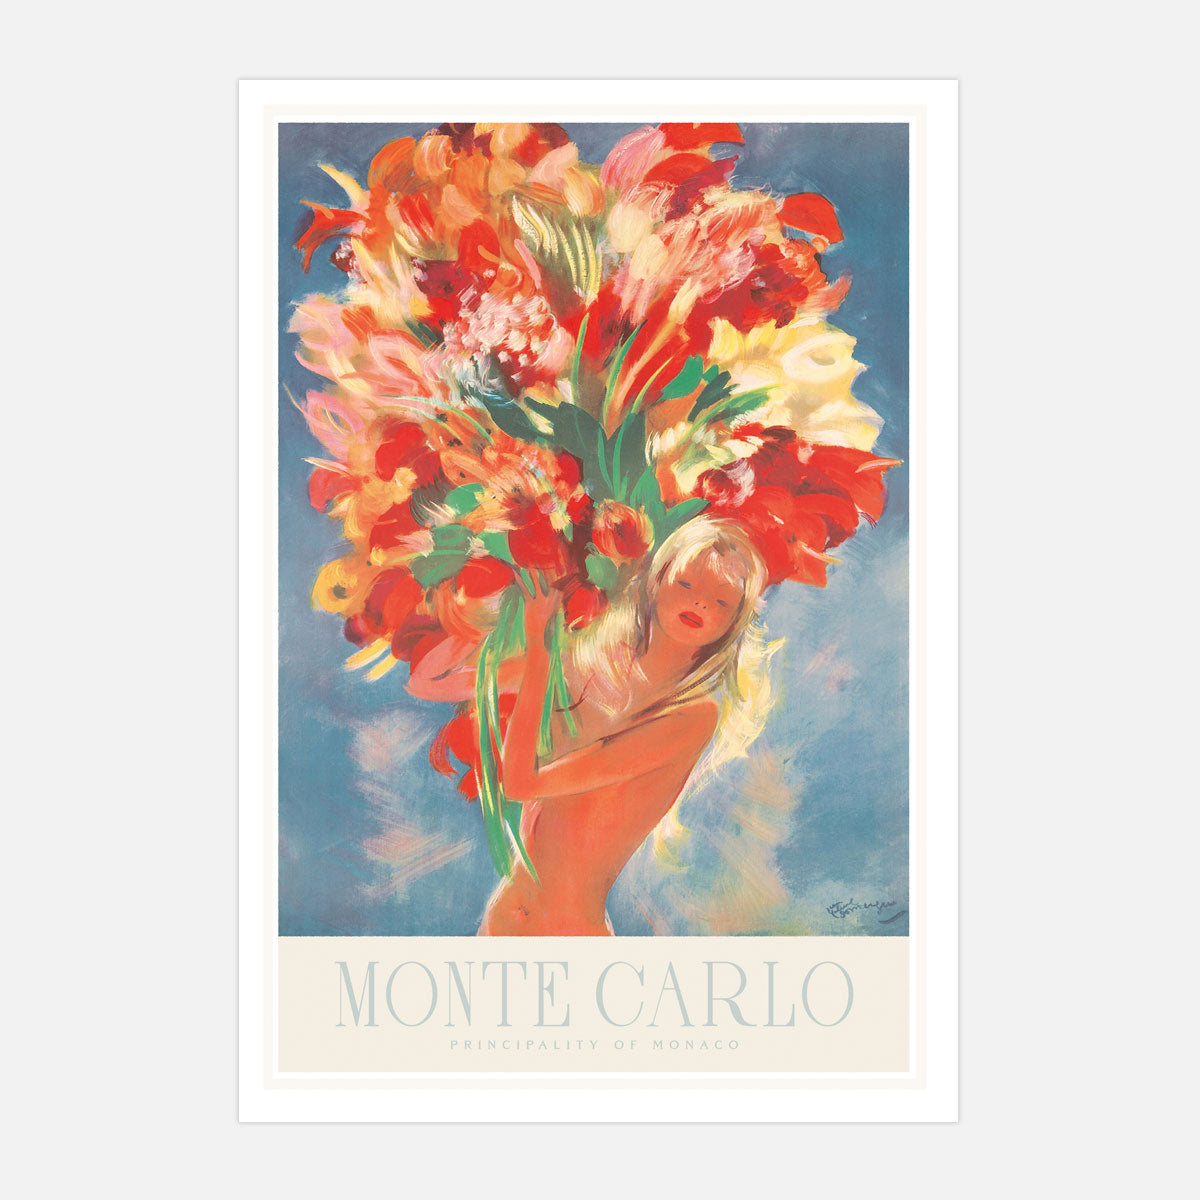 Monte Carlo Flowers retro vintage travel poster from Places We Luv